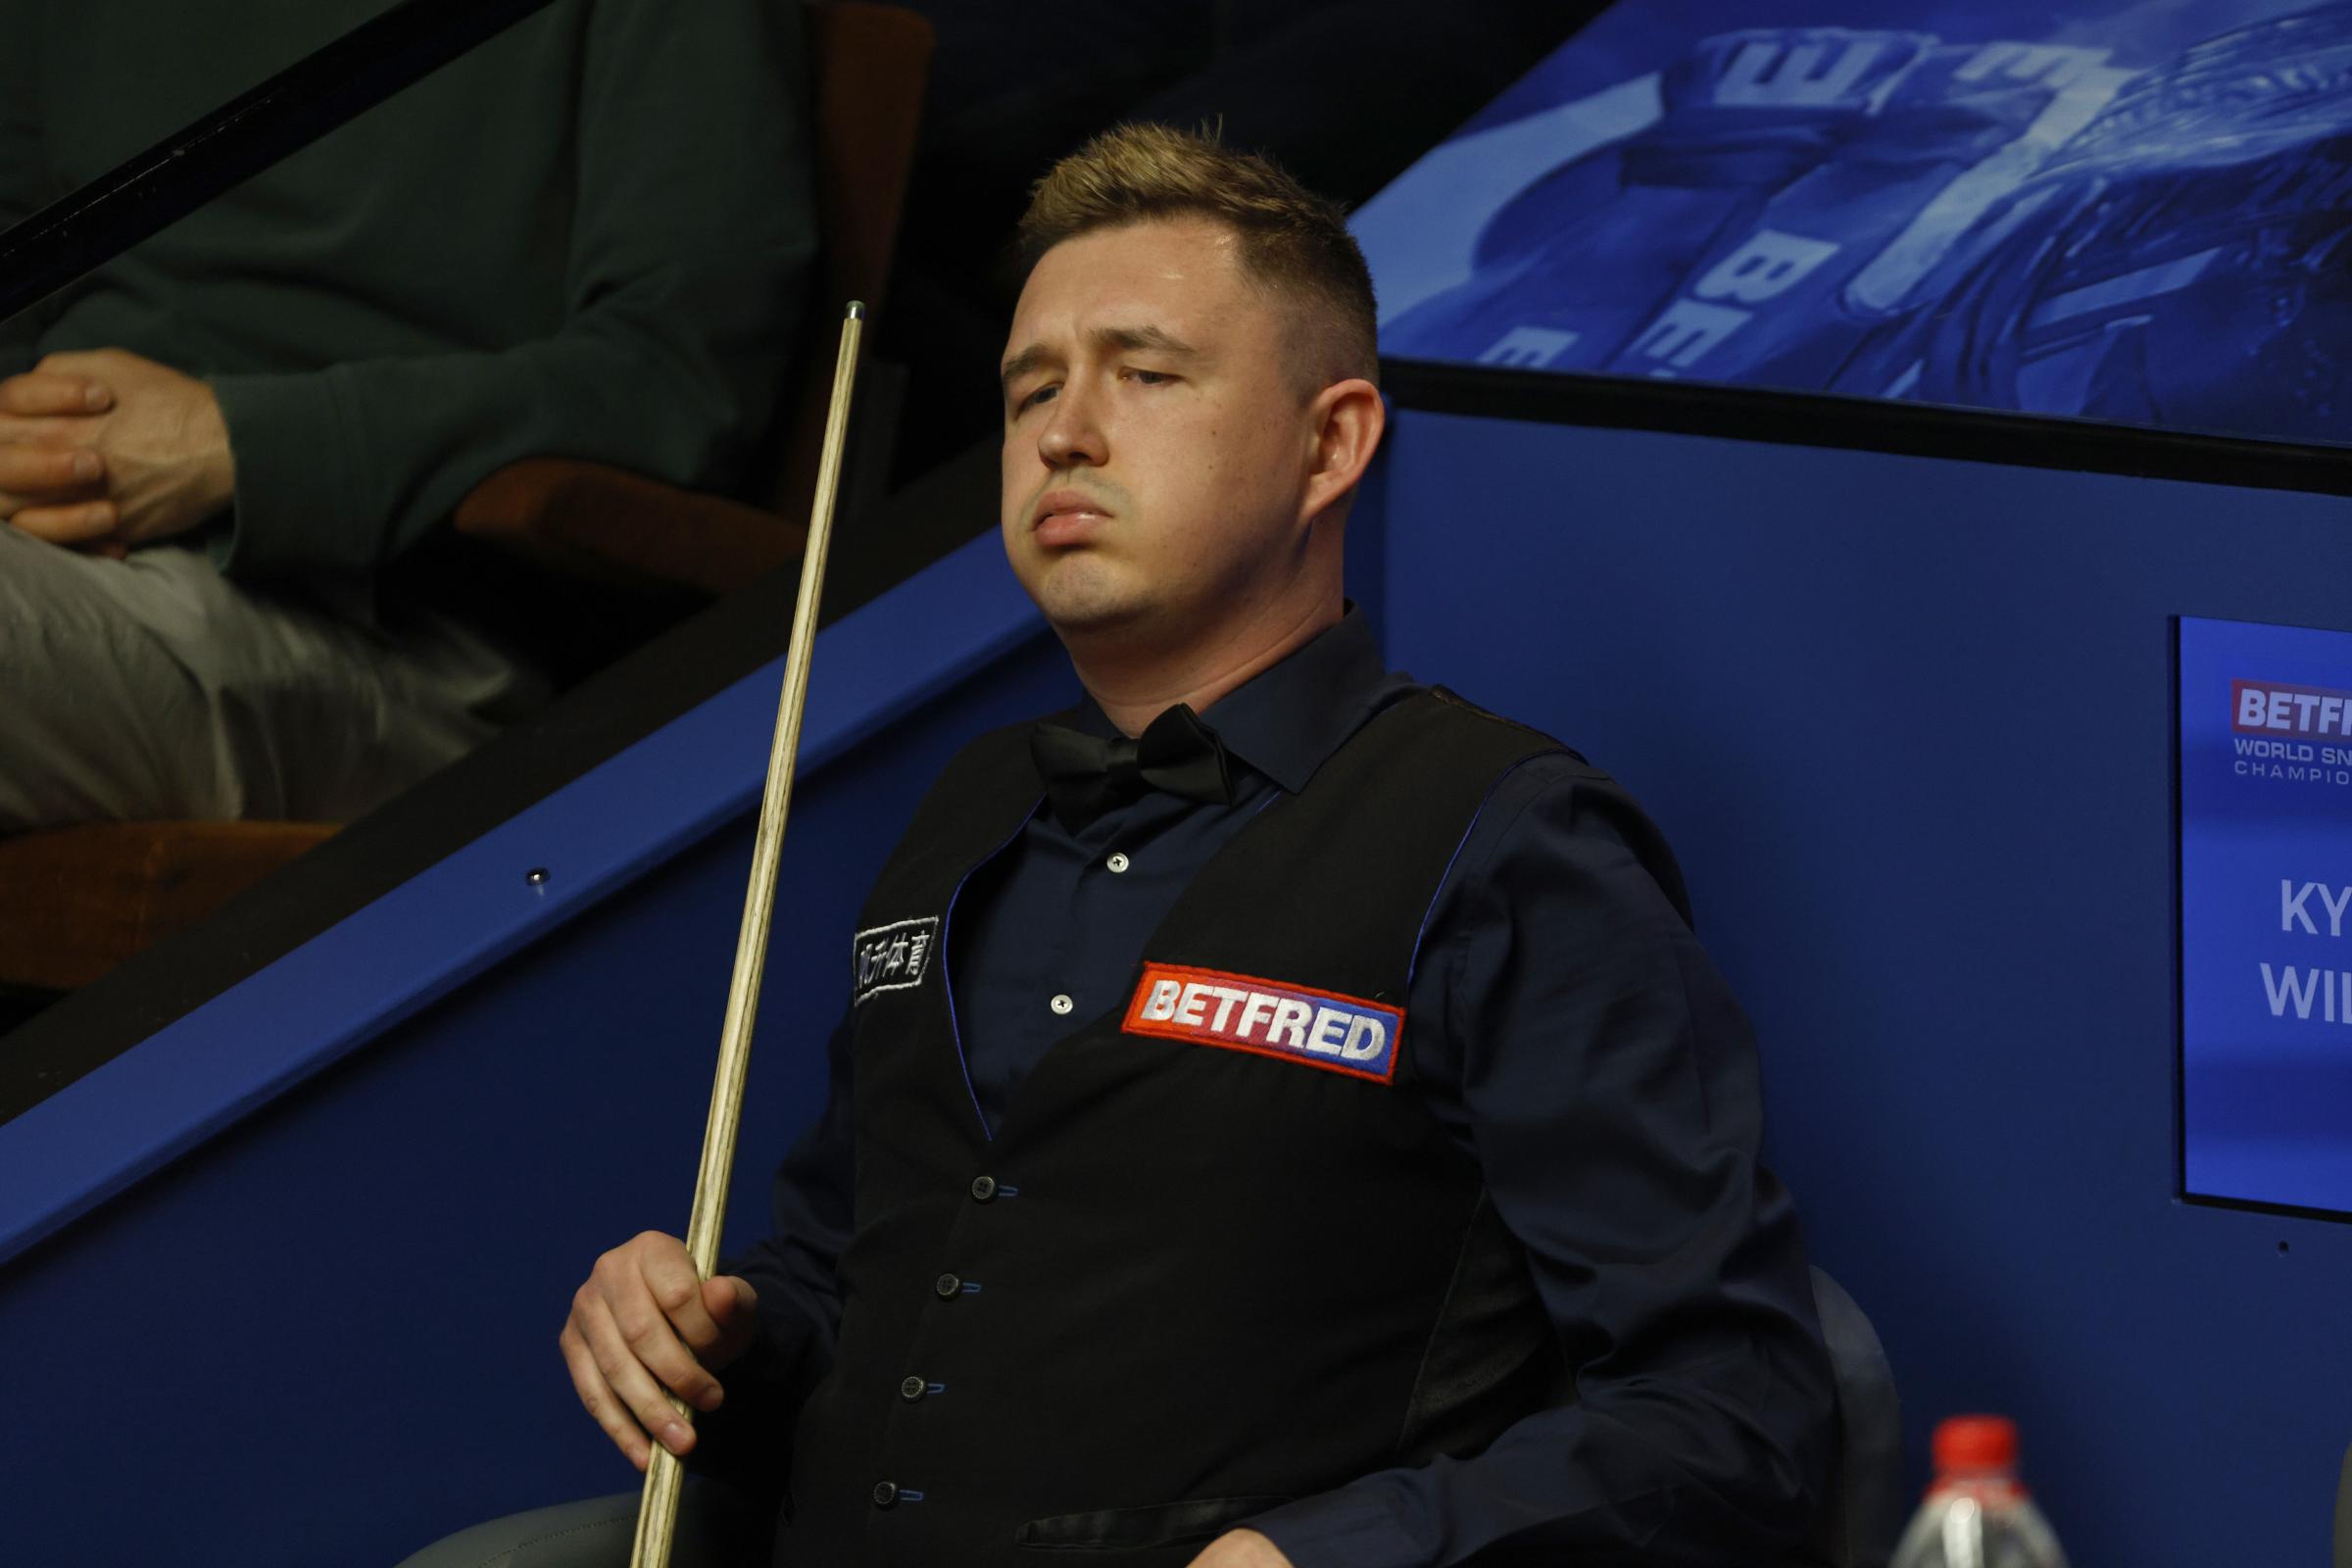 Youngster Riley Powell shocks Kyren Wilson in Snooker Shoot Out Bracknell News